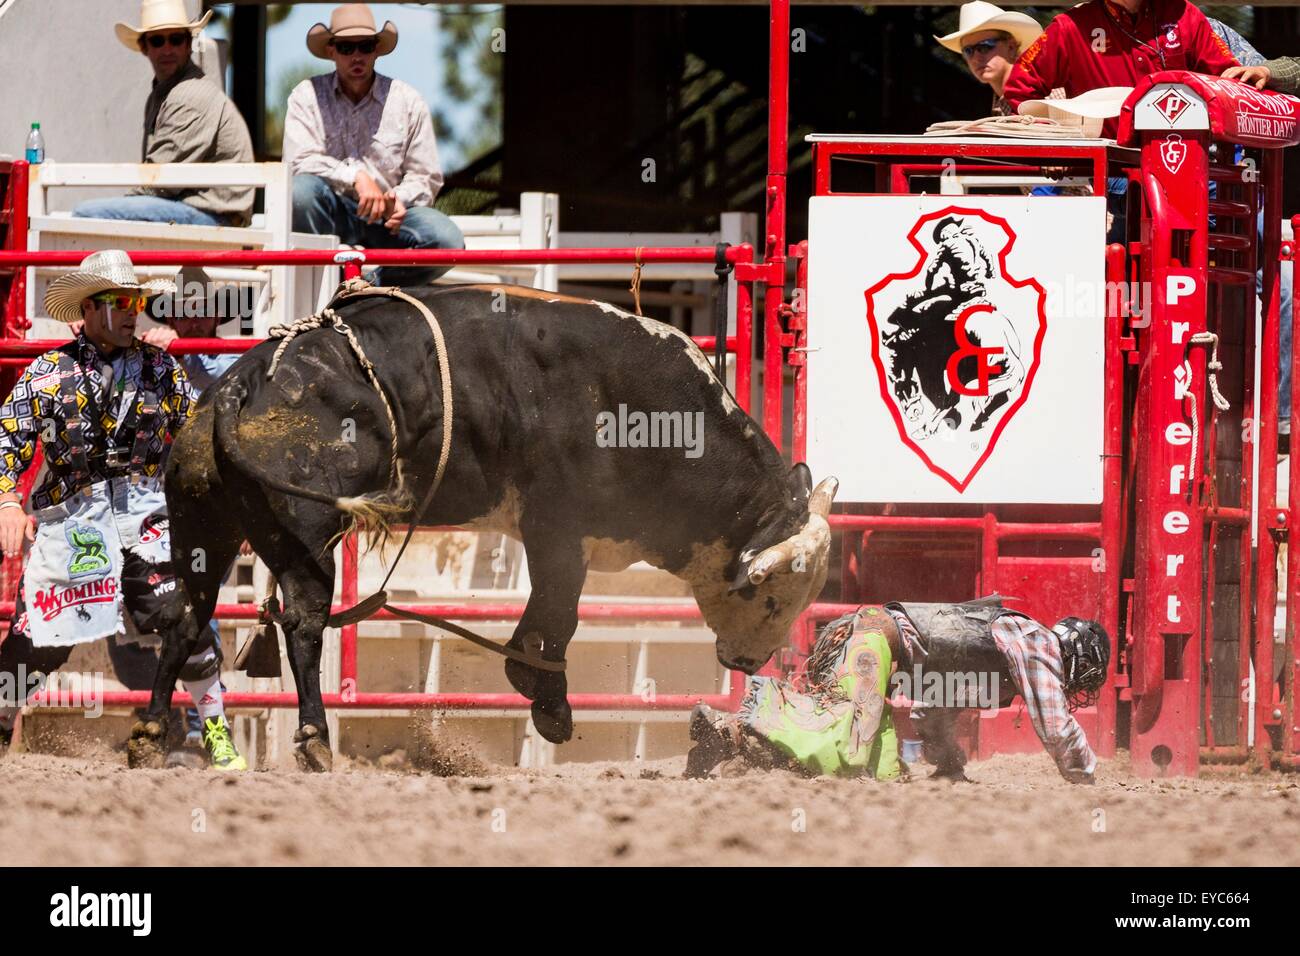 Cheyenne, Wyoming, USA. 26th July, 2015. Bull rider Tanner Bothwell is rammed by a bull after being tossed during the Bull Riding finals at the Cheyenne Frontier Days rodeo in Frontier Park Arena July 26, 2015 in Cheyenne, Wyoming. Frontier Days celebrates the cowboy traditions of the west with a rodeo, parade and fair. Stock Photo